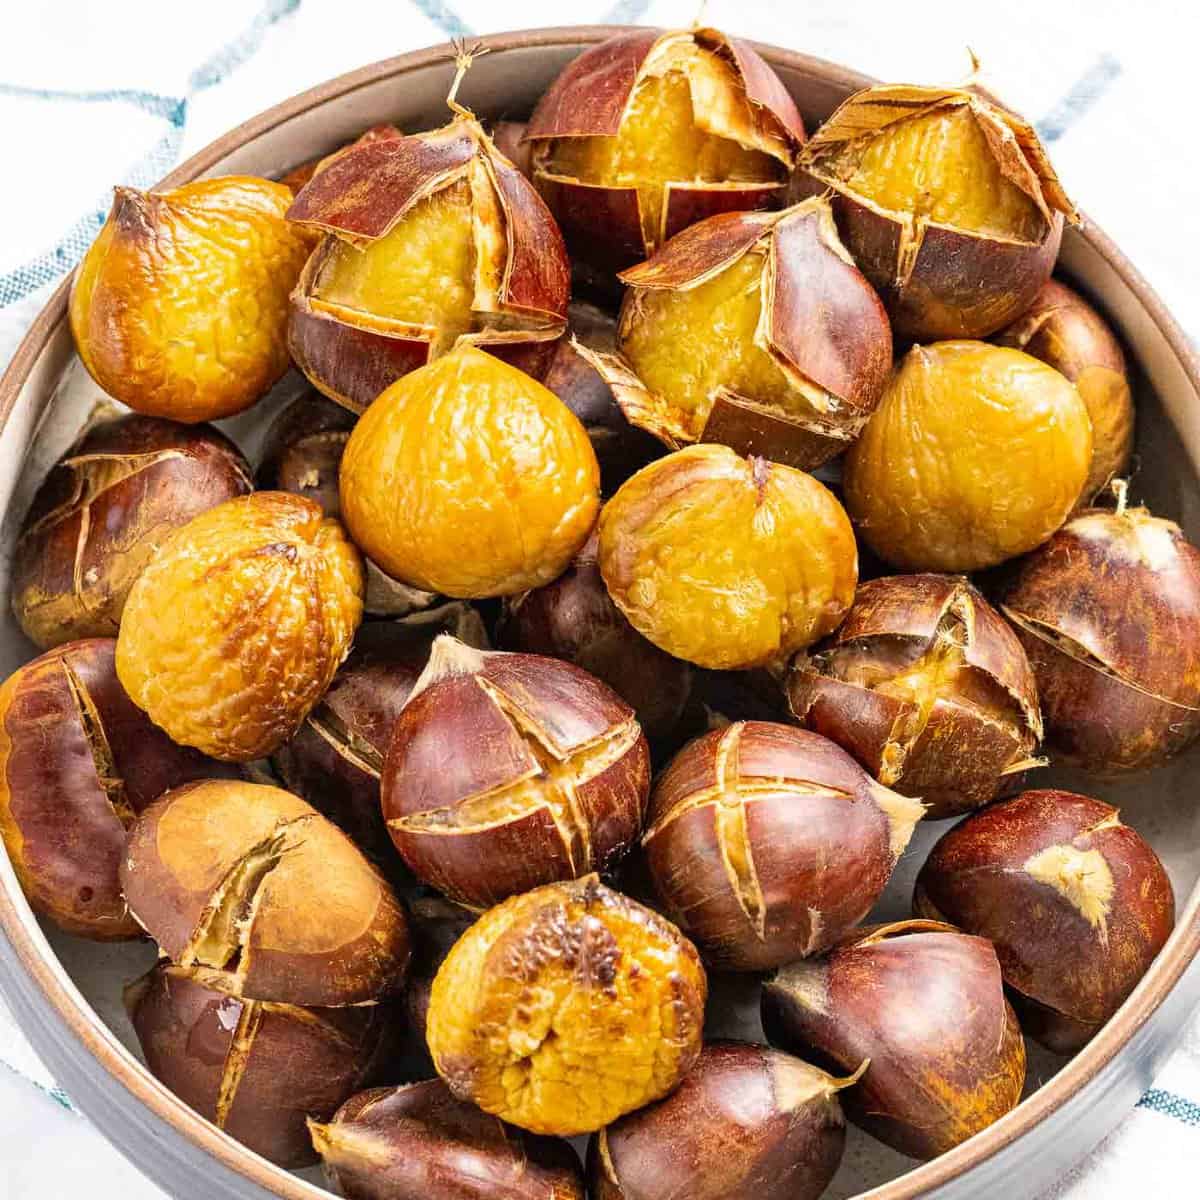 Roasted chestnuts with outer shell peeled back.